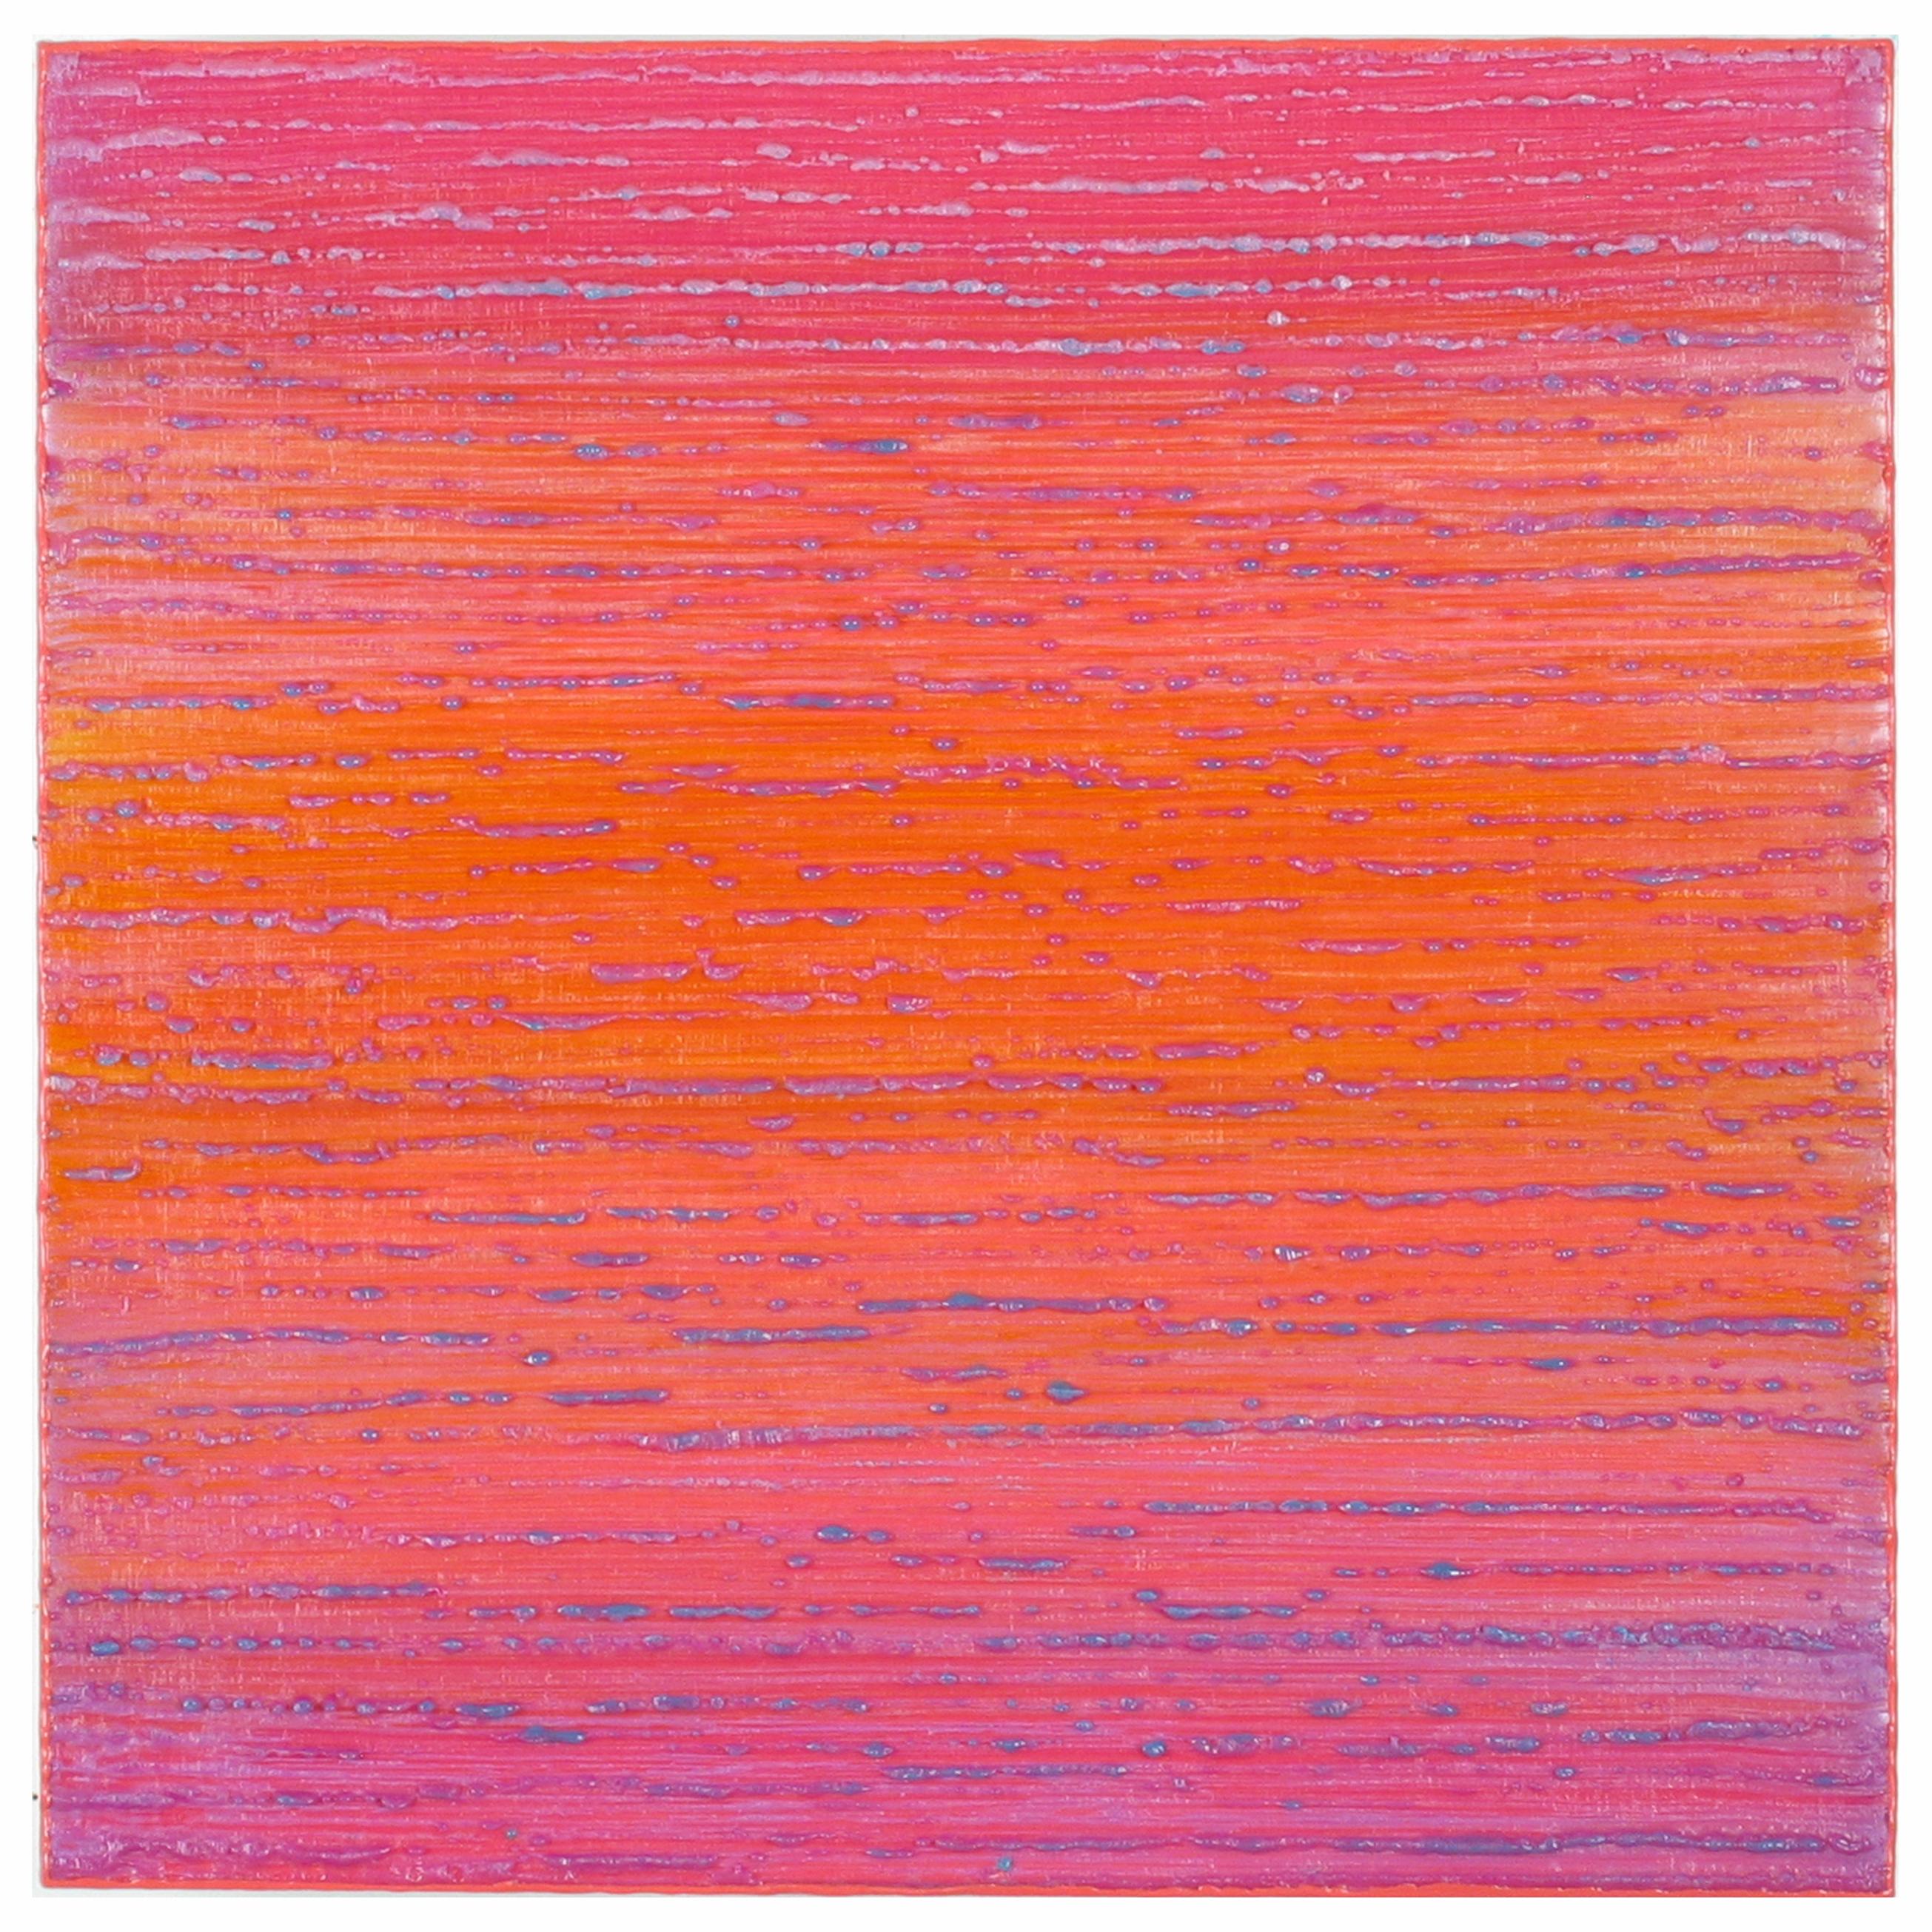 Joanne Mattera Abstract Painting - Silk Road 444, 2019, encaustic on panel, 12 x 12 x 2 inches